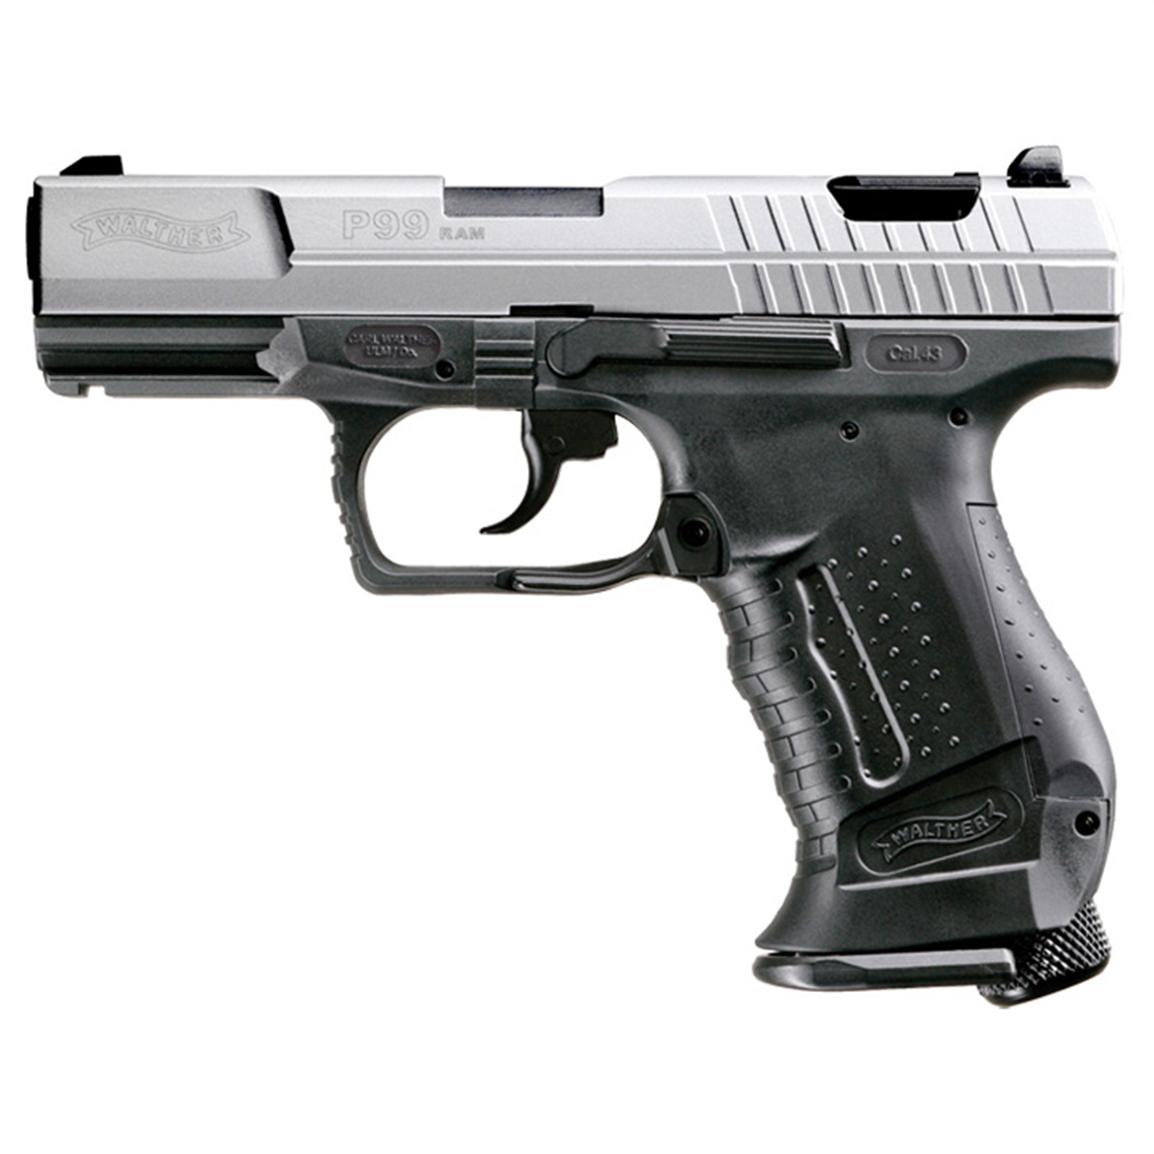 Walther P99 Pistol #26